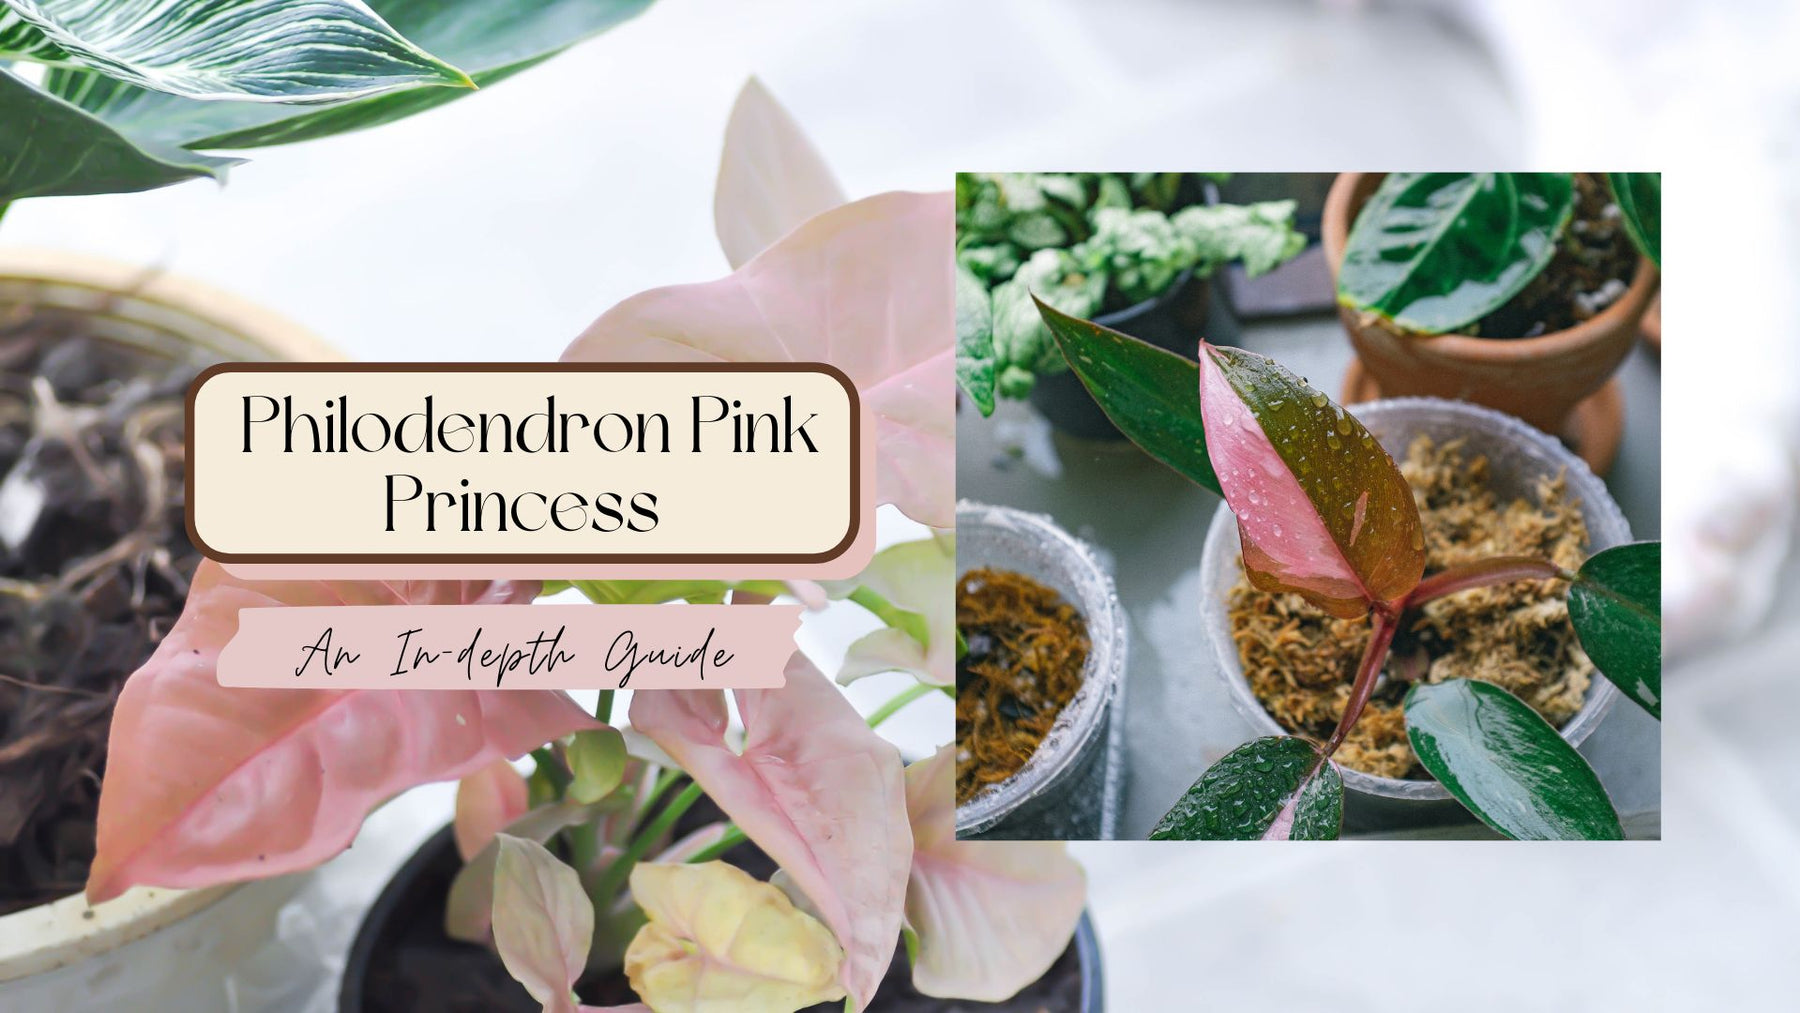 Philodendron Pink Princess: An In-depth Guide